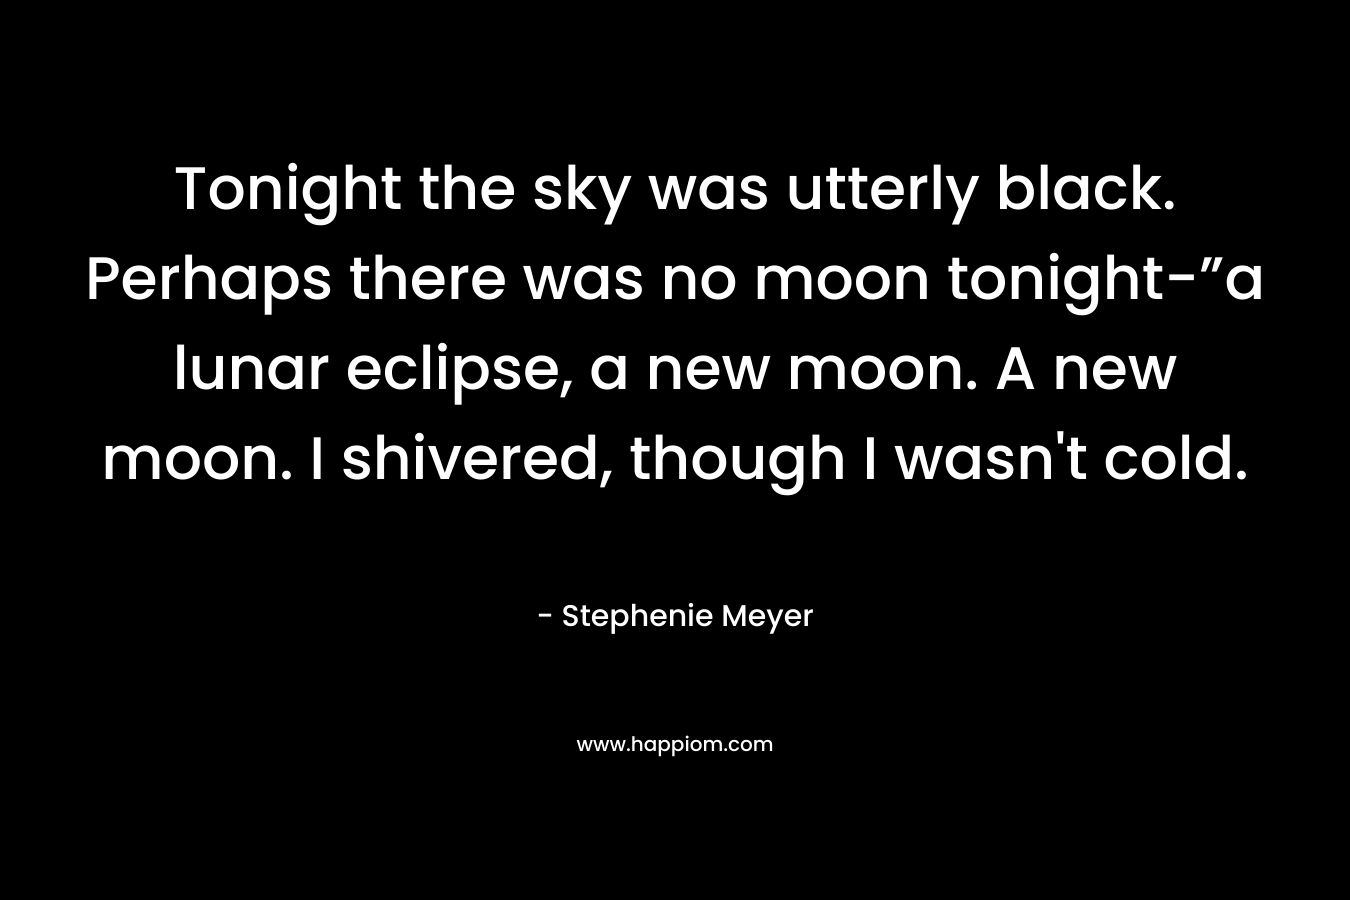 Tonight the sky was utterly black. Perhaps there was no moon tonight-”a lunar eclipse, a new moon. A new moon. I shivered, though I wasn't cold.